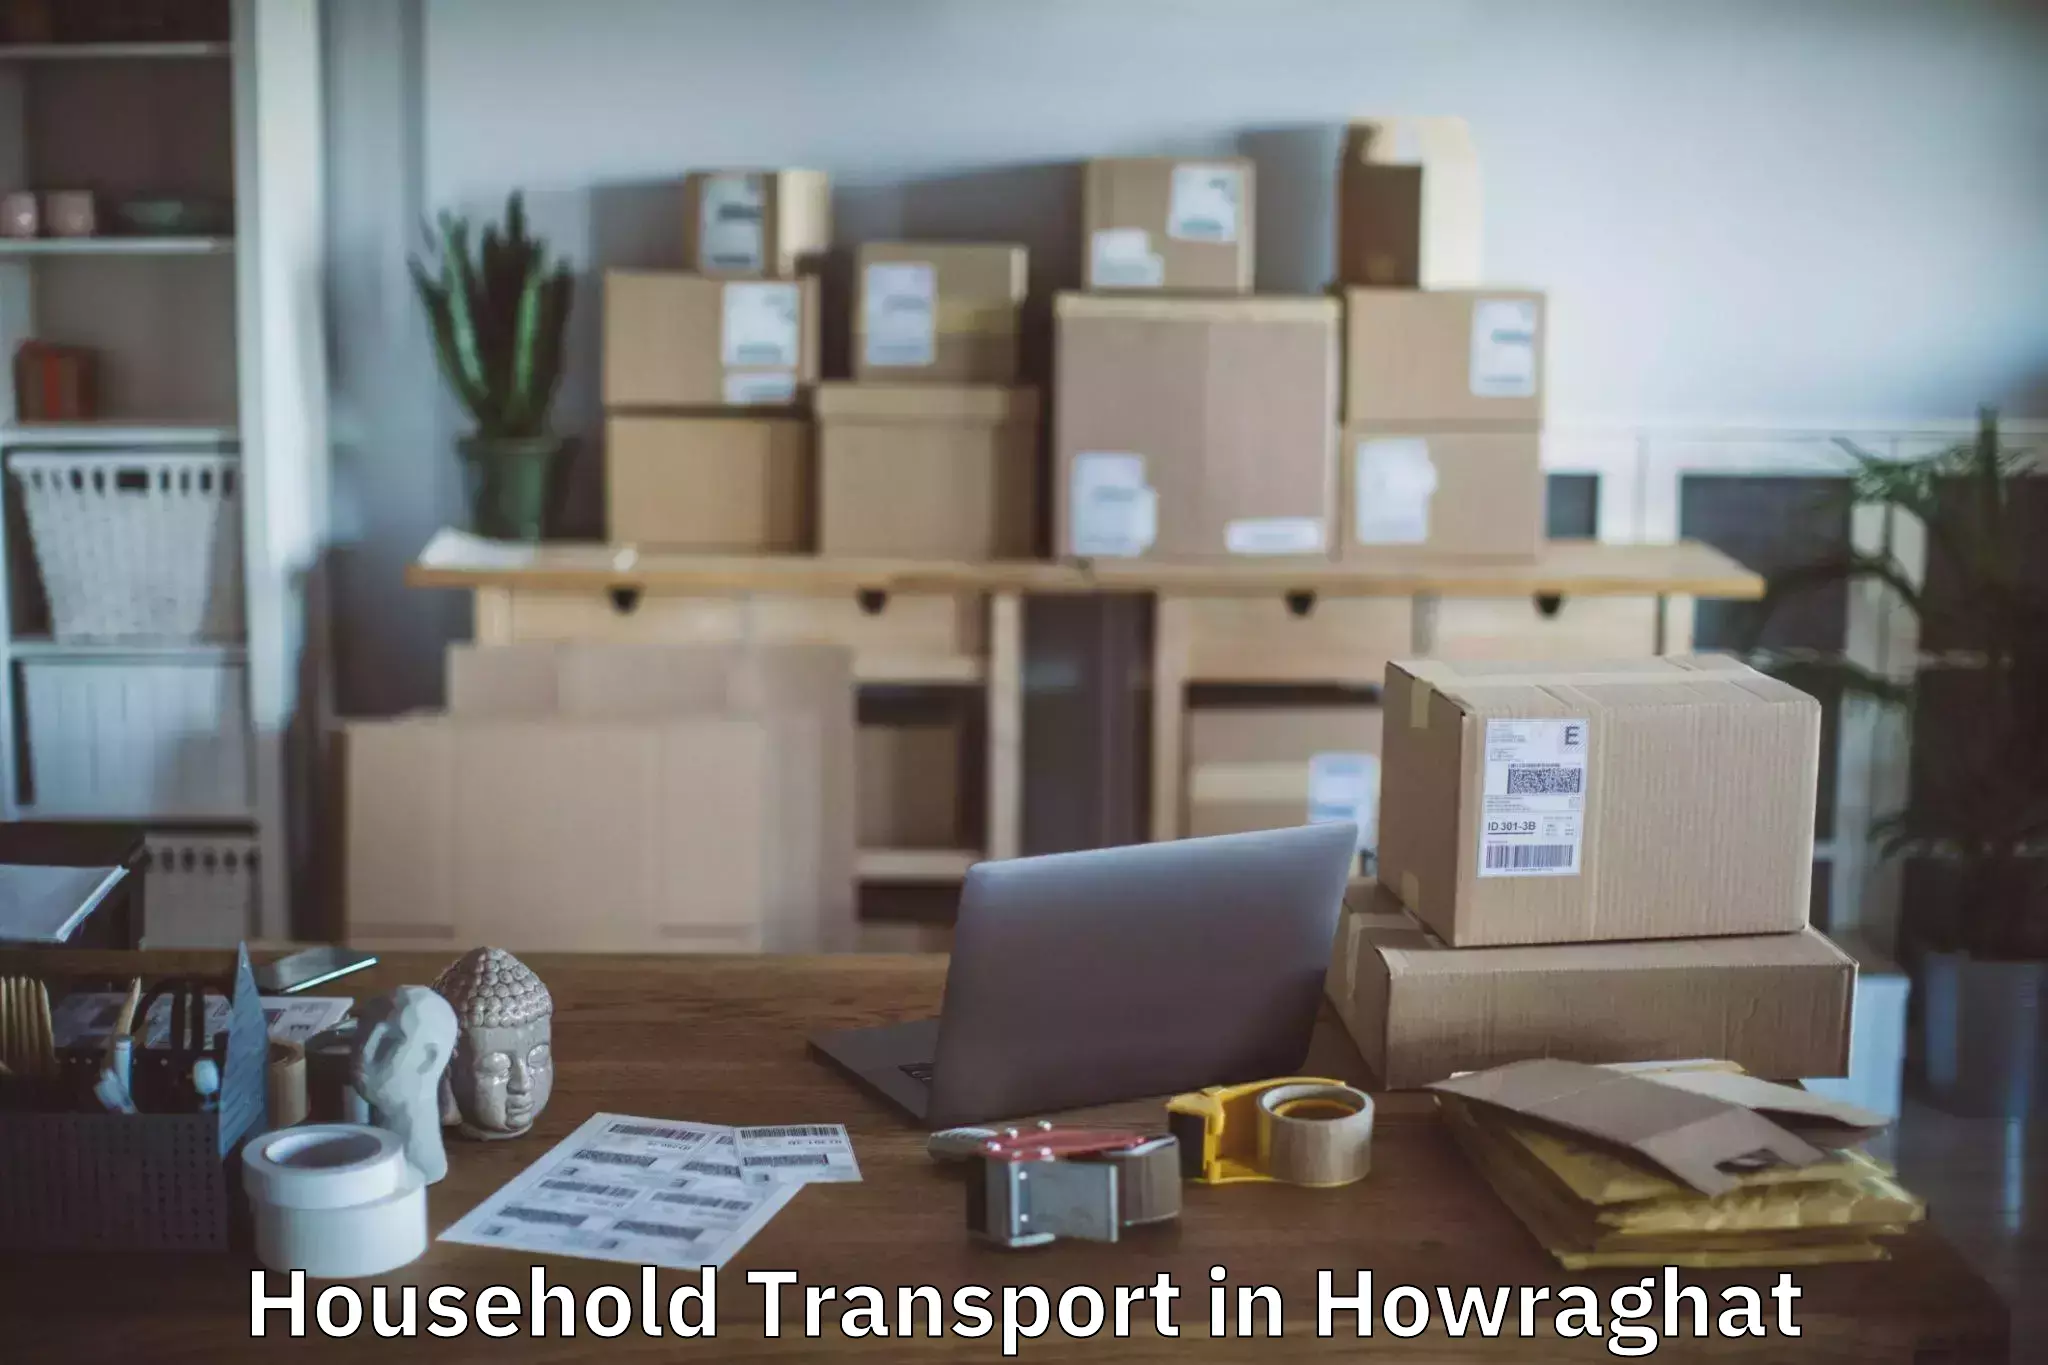 Professional furniture moving in Howraghat